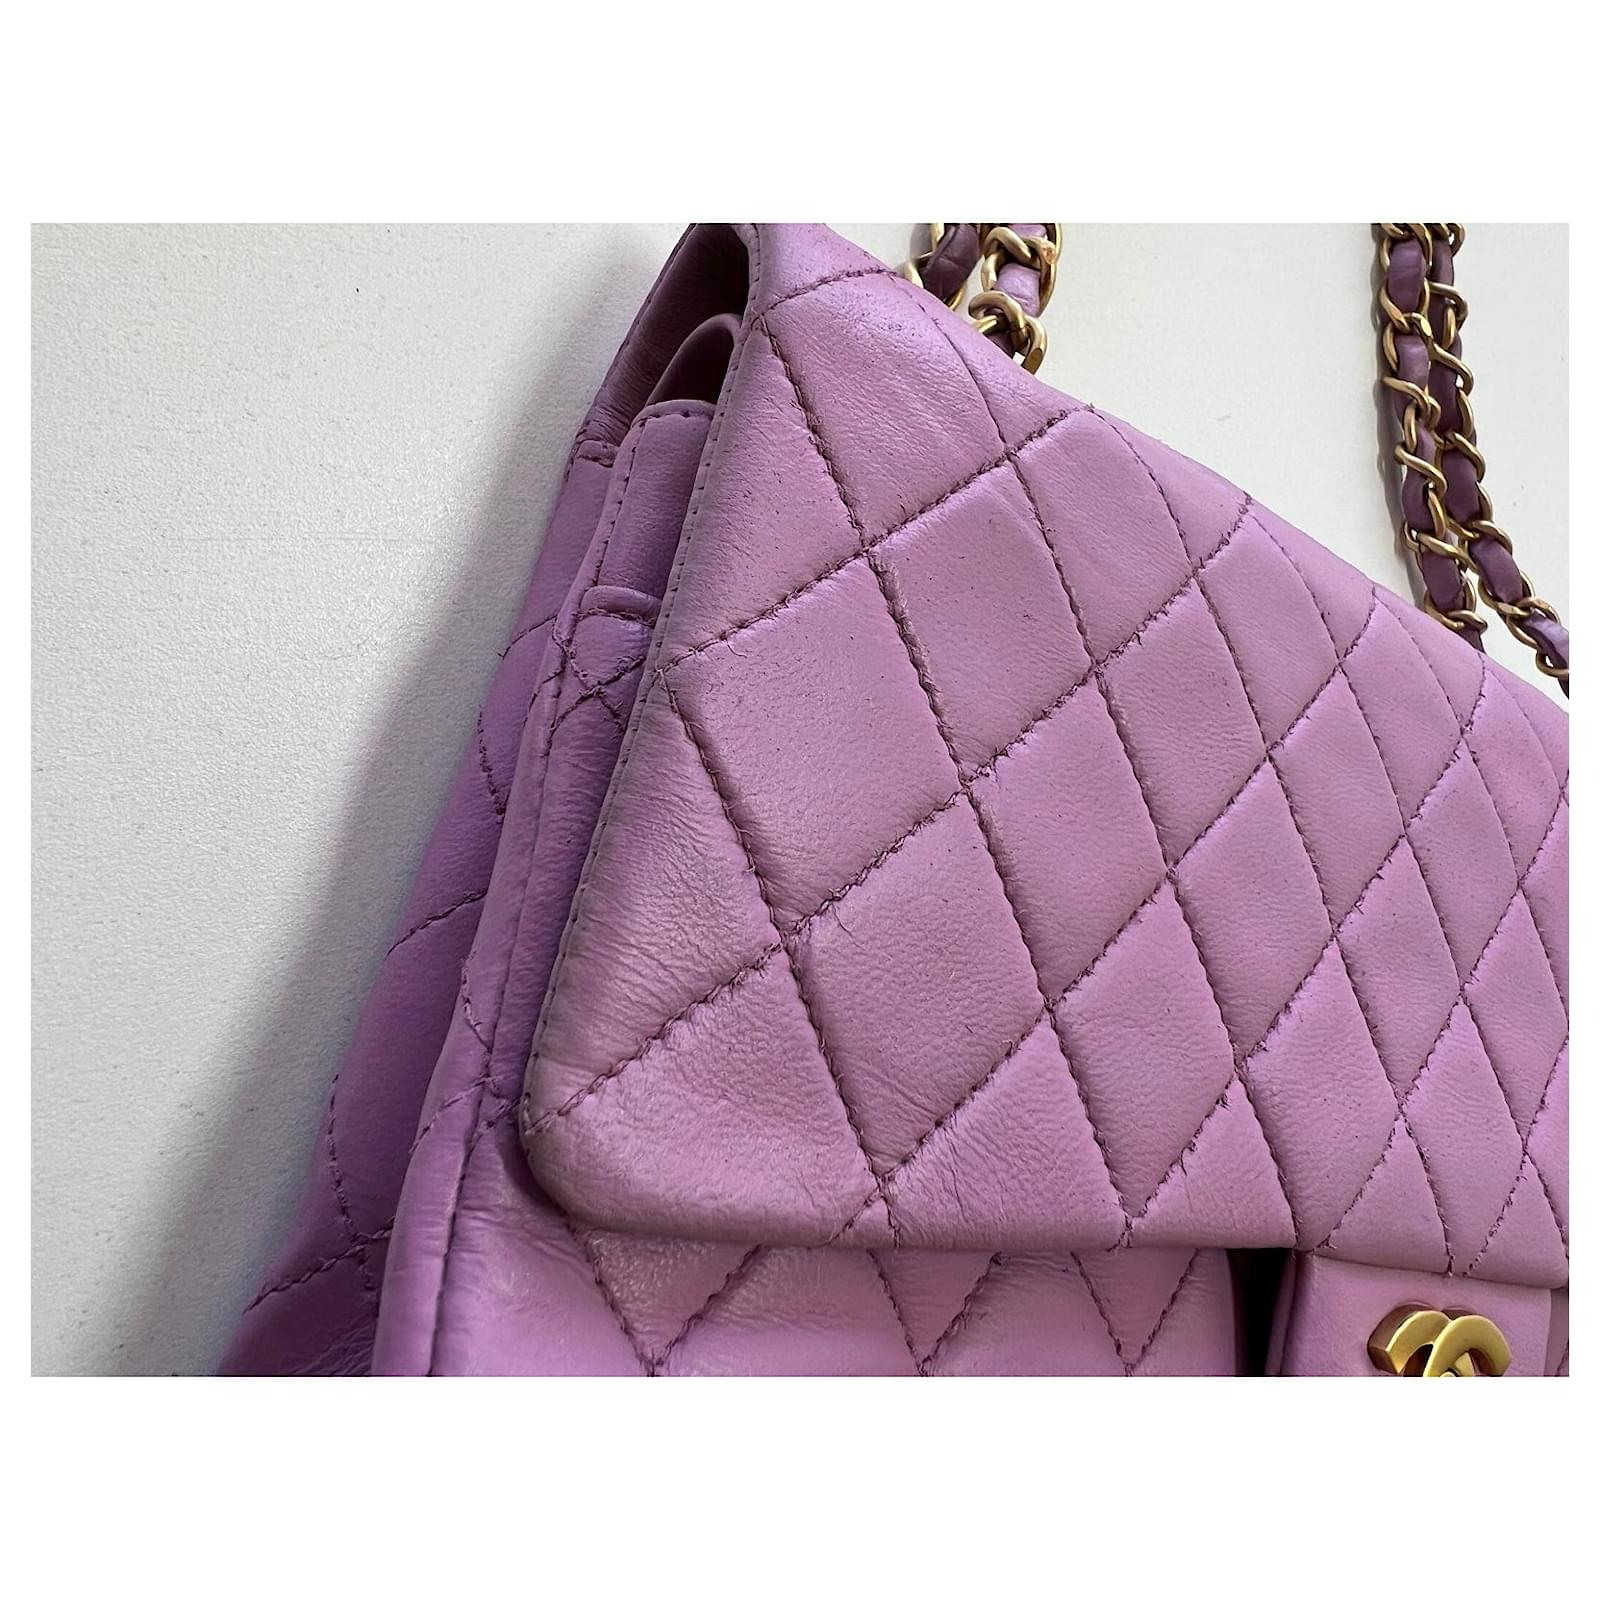 Stunning Chanel Quilted Lambskin Leather Lilac Light Purple Classic  Timeless Medium lined Flap Handbag with Matte Gold Champaign Hardware!